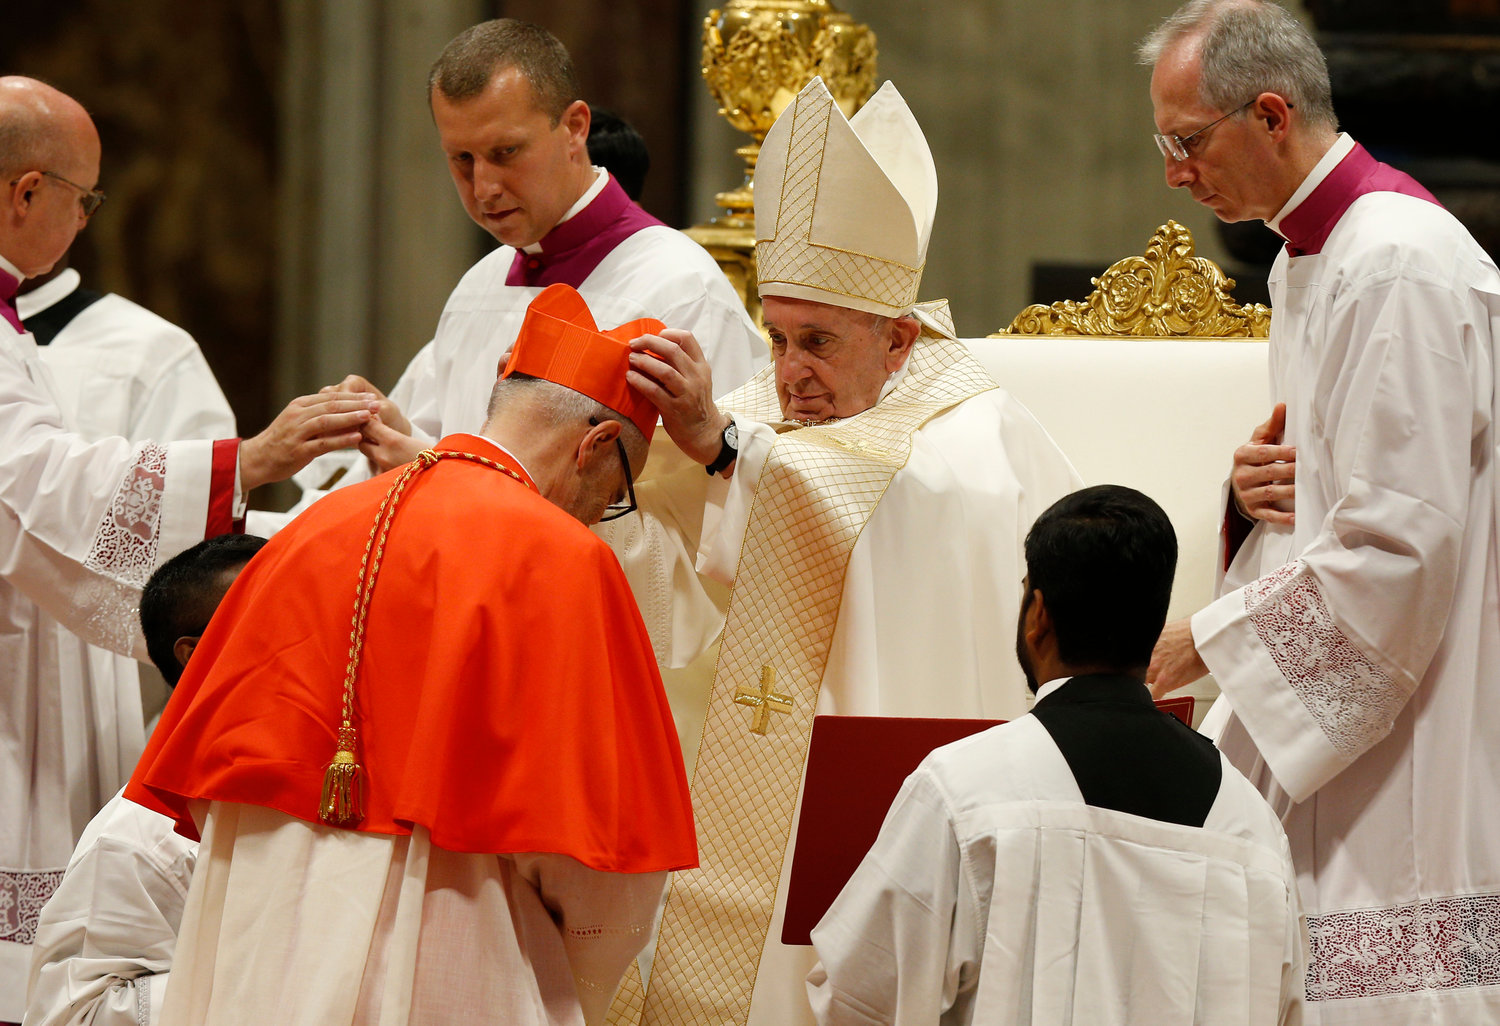 Pope Francis places a red biretta on new Canadian Cardinal Michael Czerny during a consistory for the creation of 13 new cardinals in St. Peter’s Basilica at the Vatican Oct. 5, 2019.